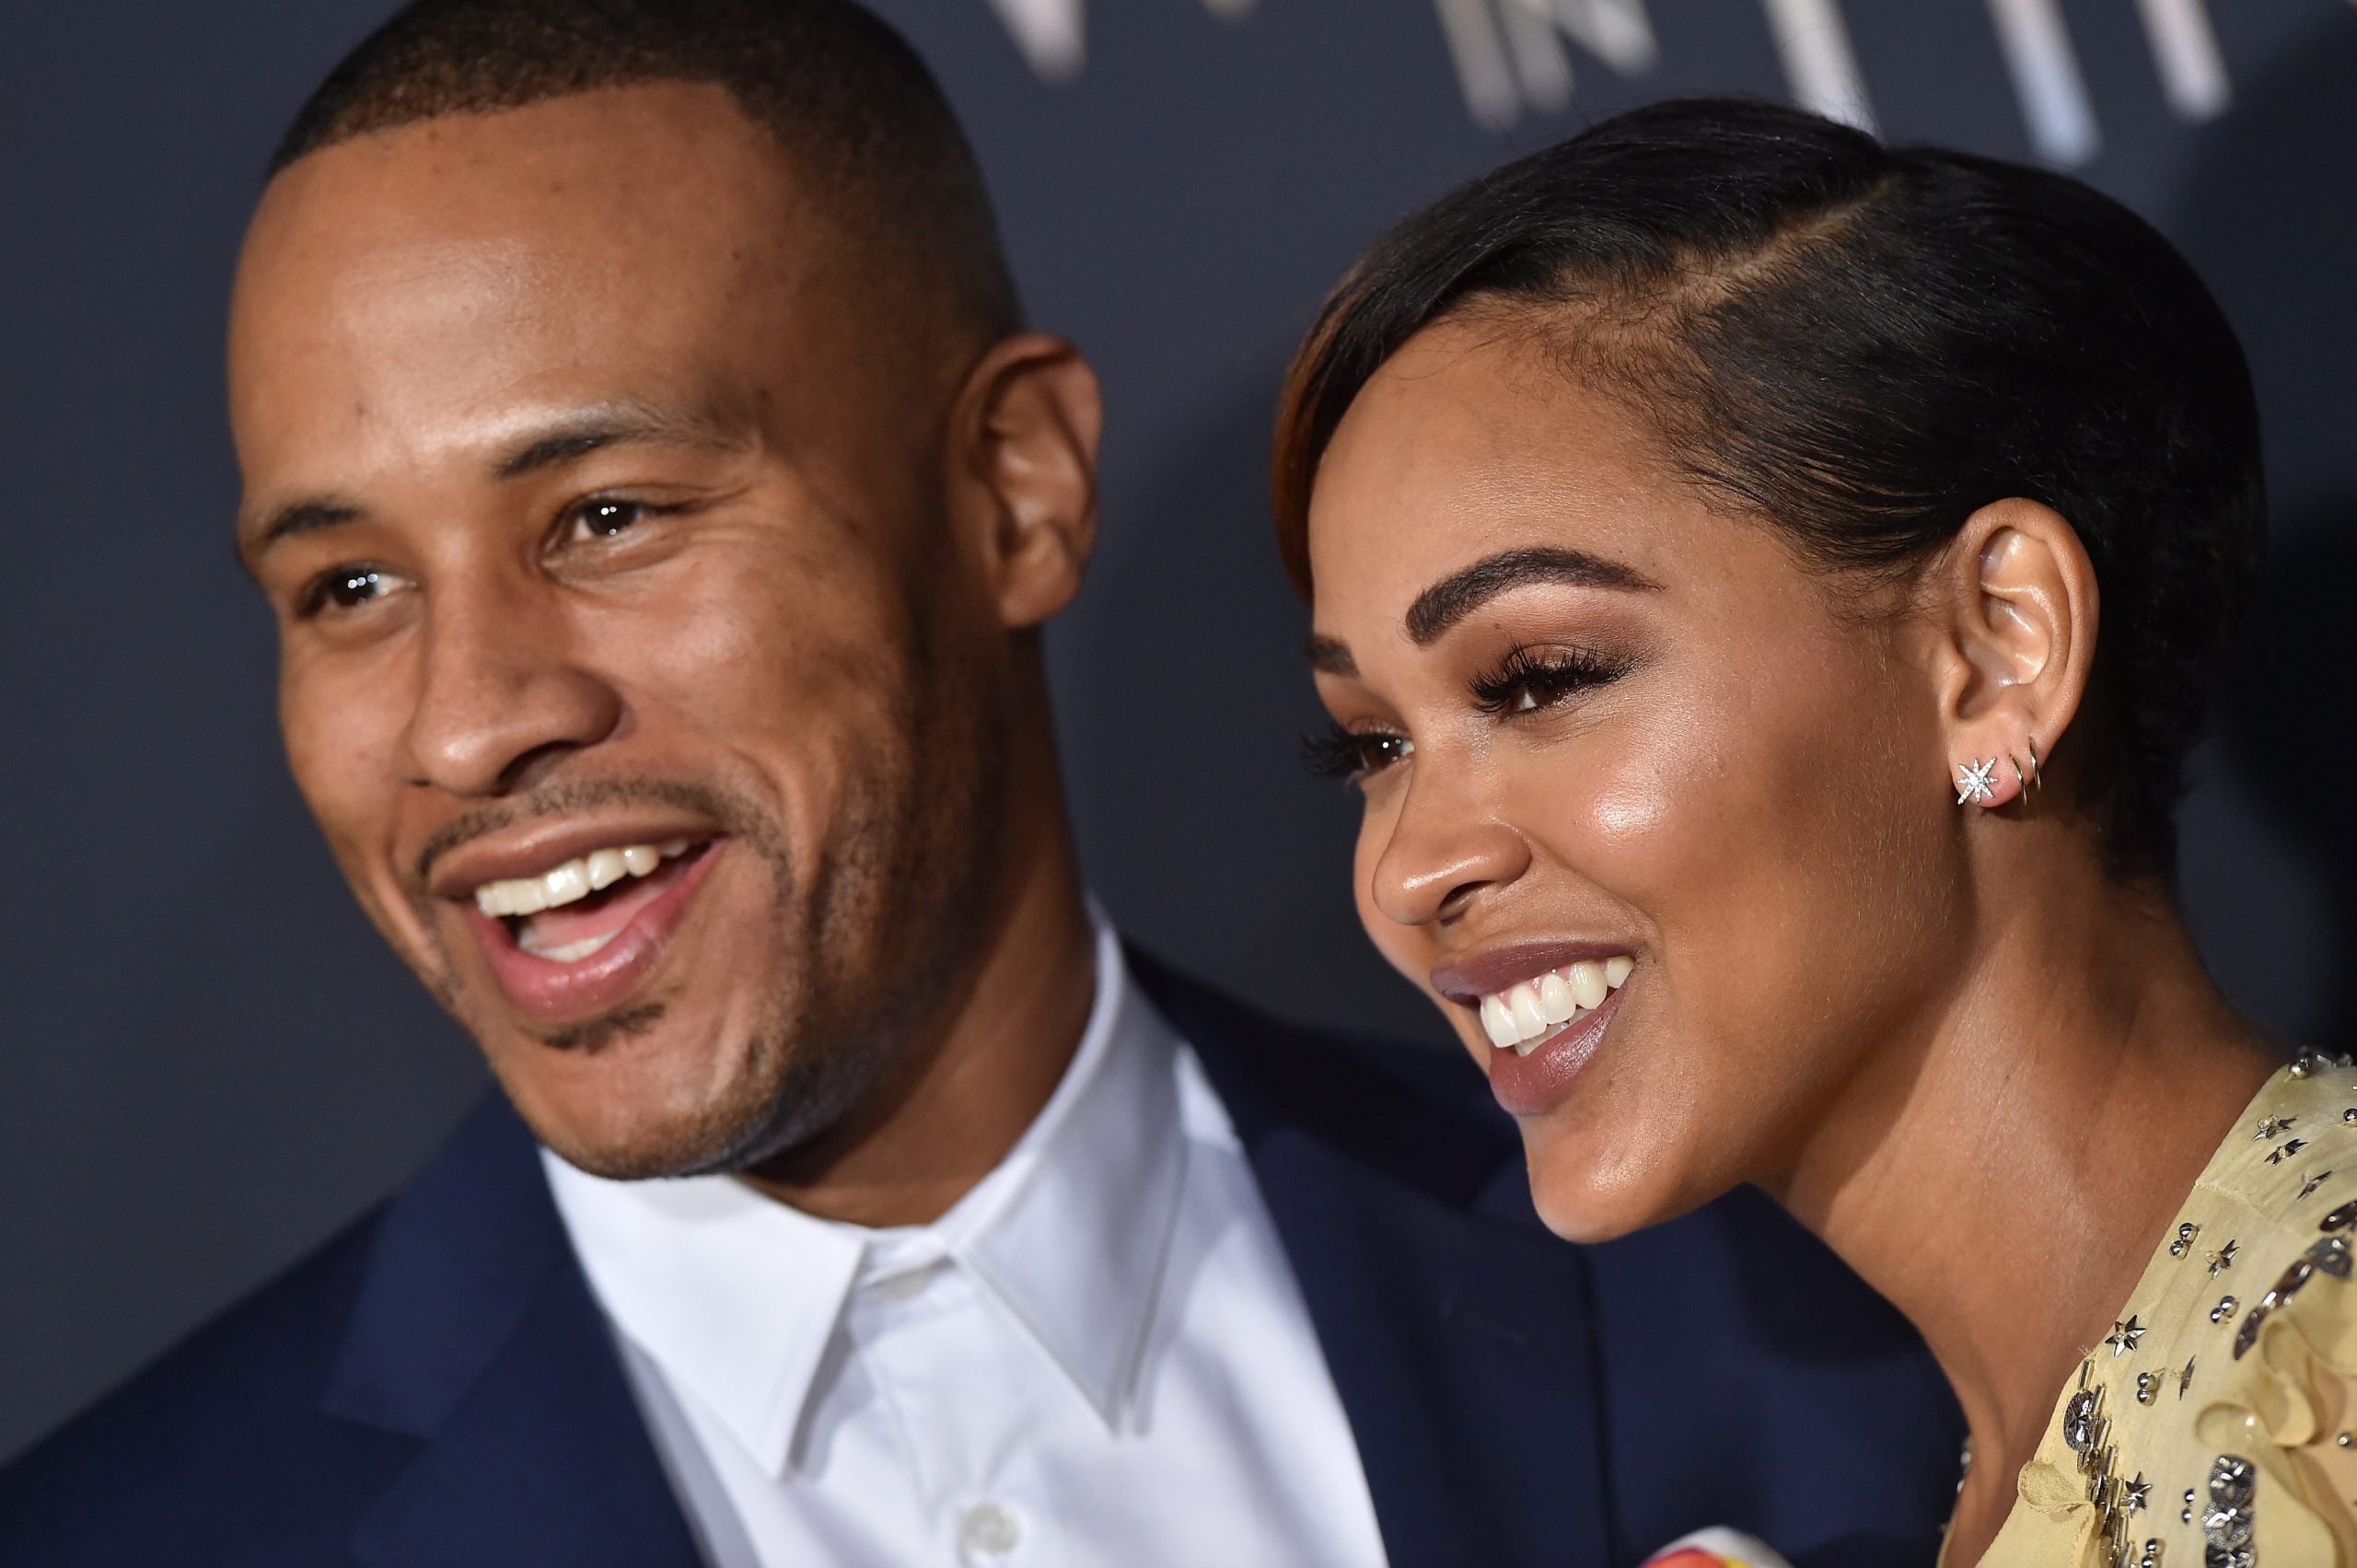 For The Record, DeVon Franklin Doesn’t Regret Writing ‘The Wait’ With Ex-Wife Meagan Good